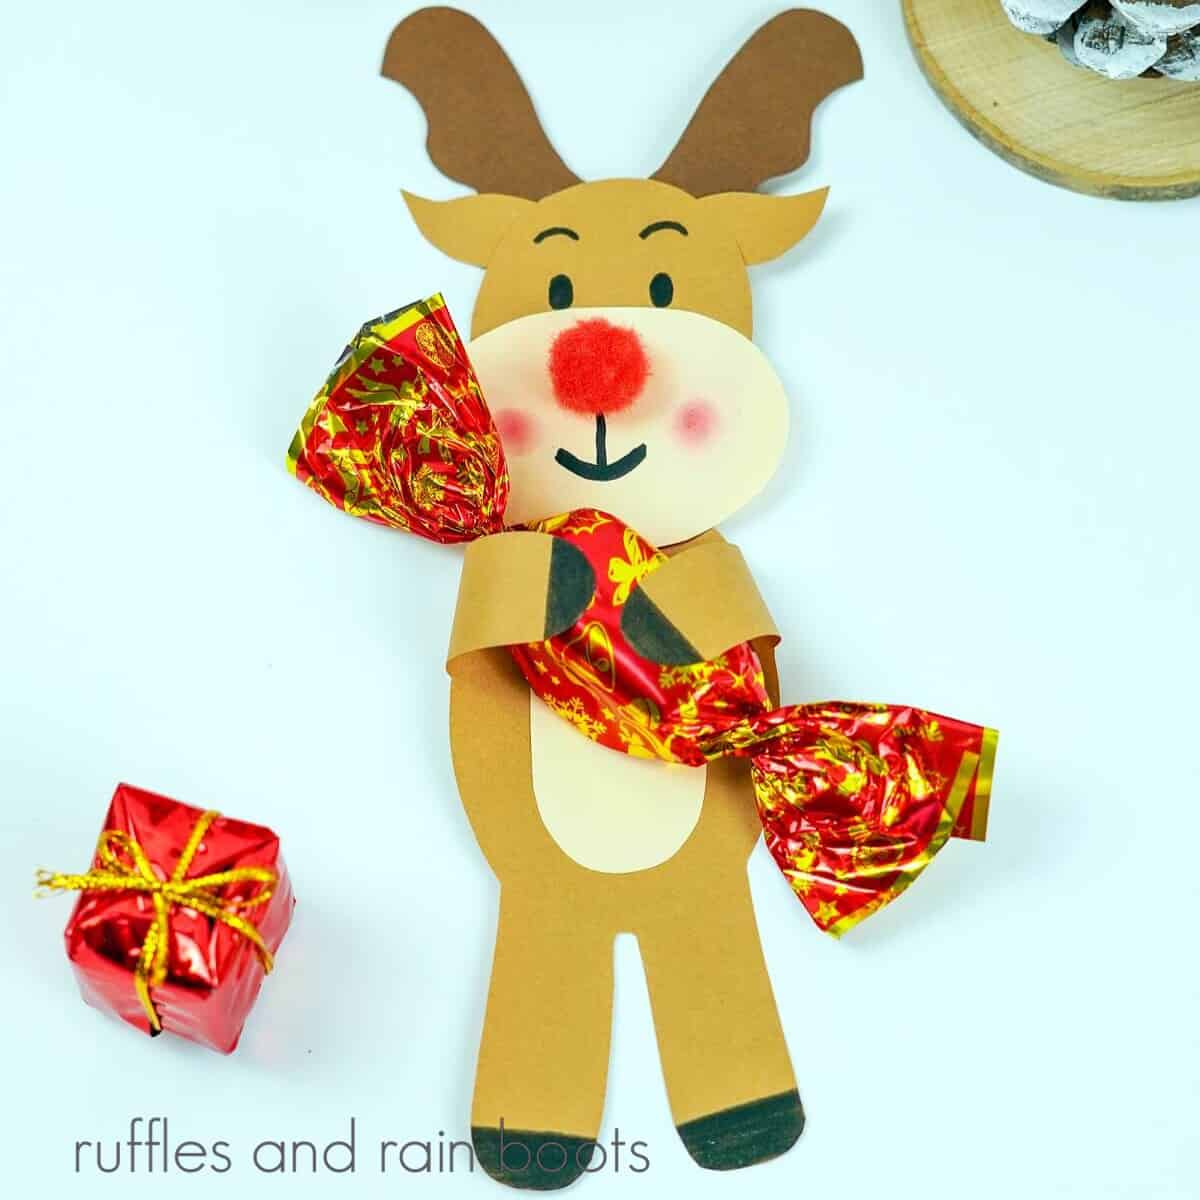 A square image of a paper cut-out reindeer holding a piece of candy next to holiday Christmas decorations against a white background.